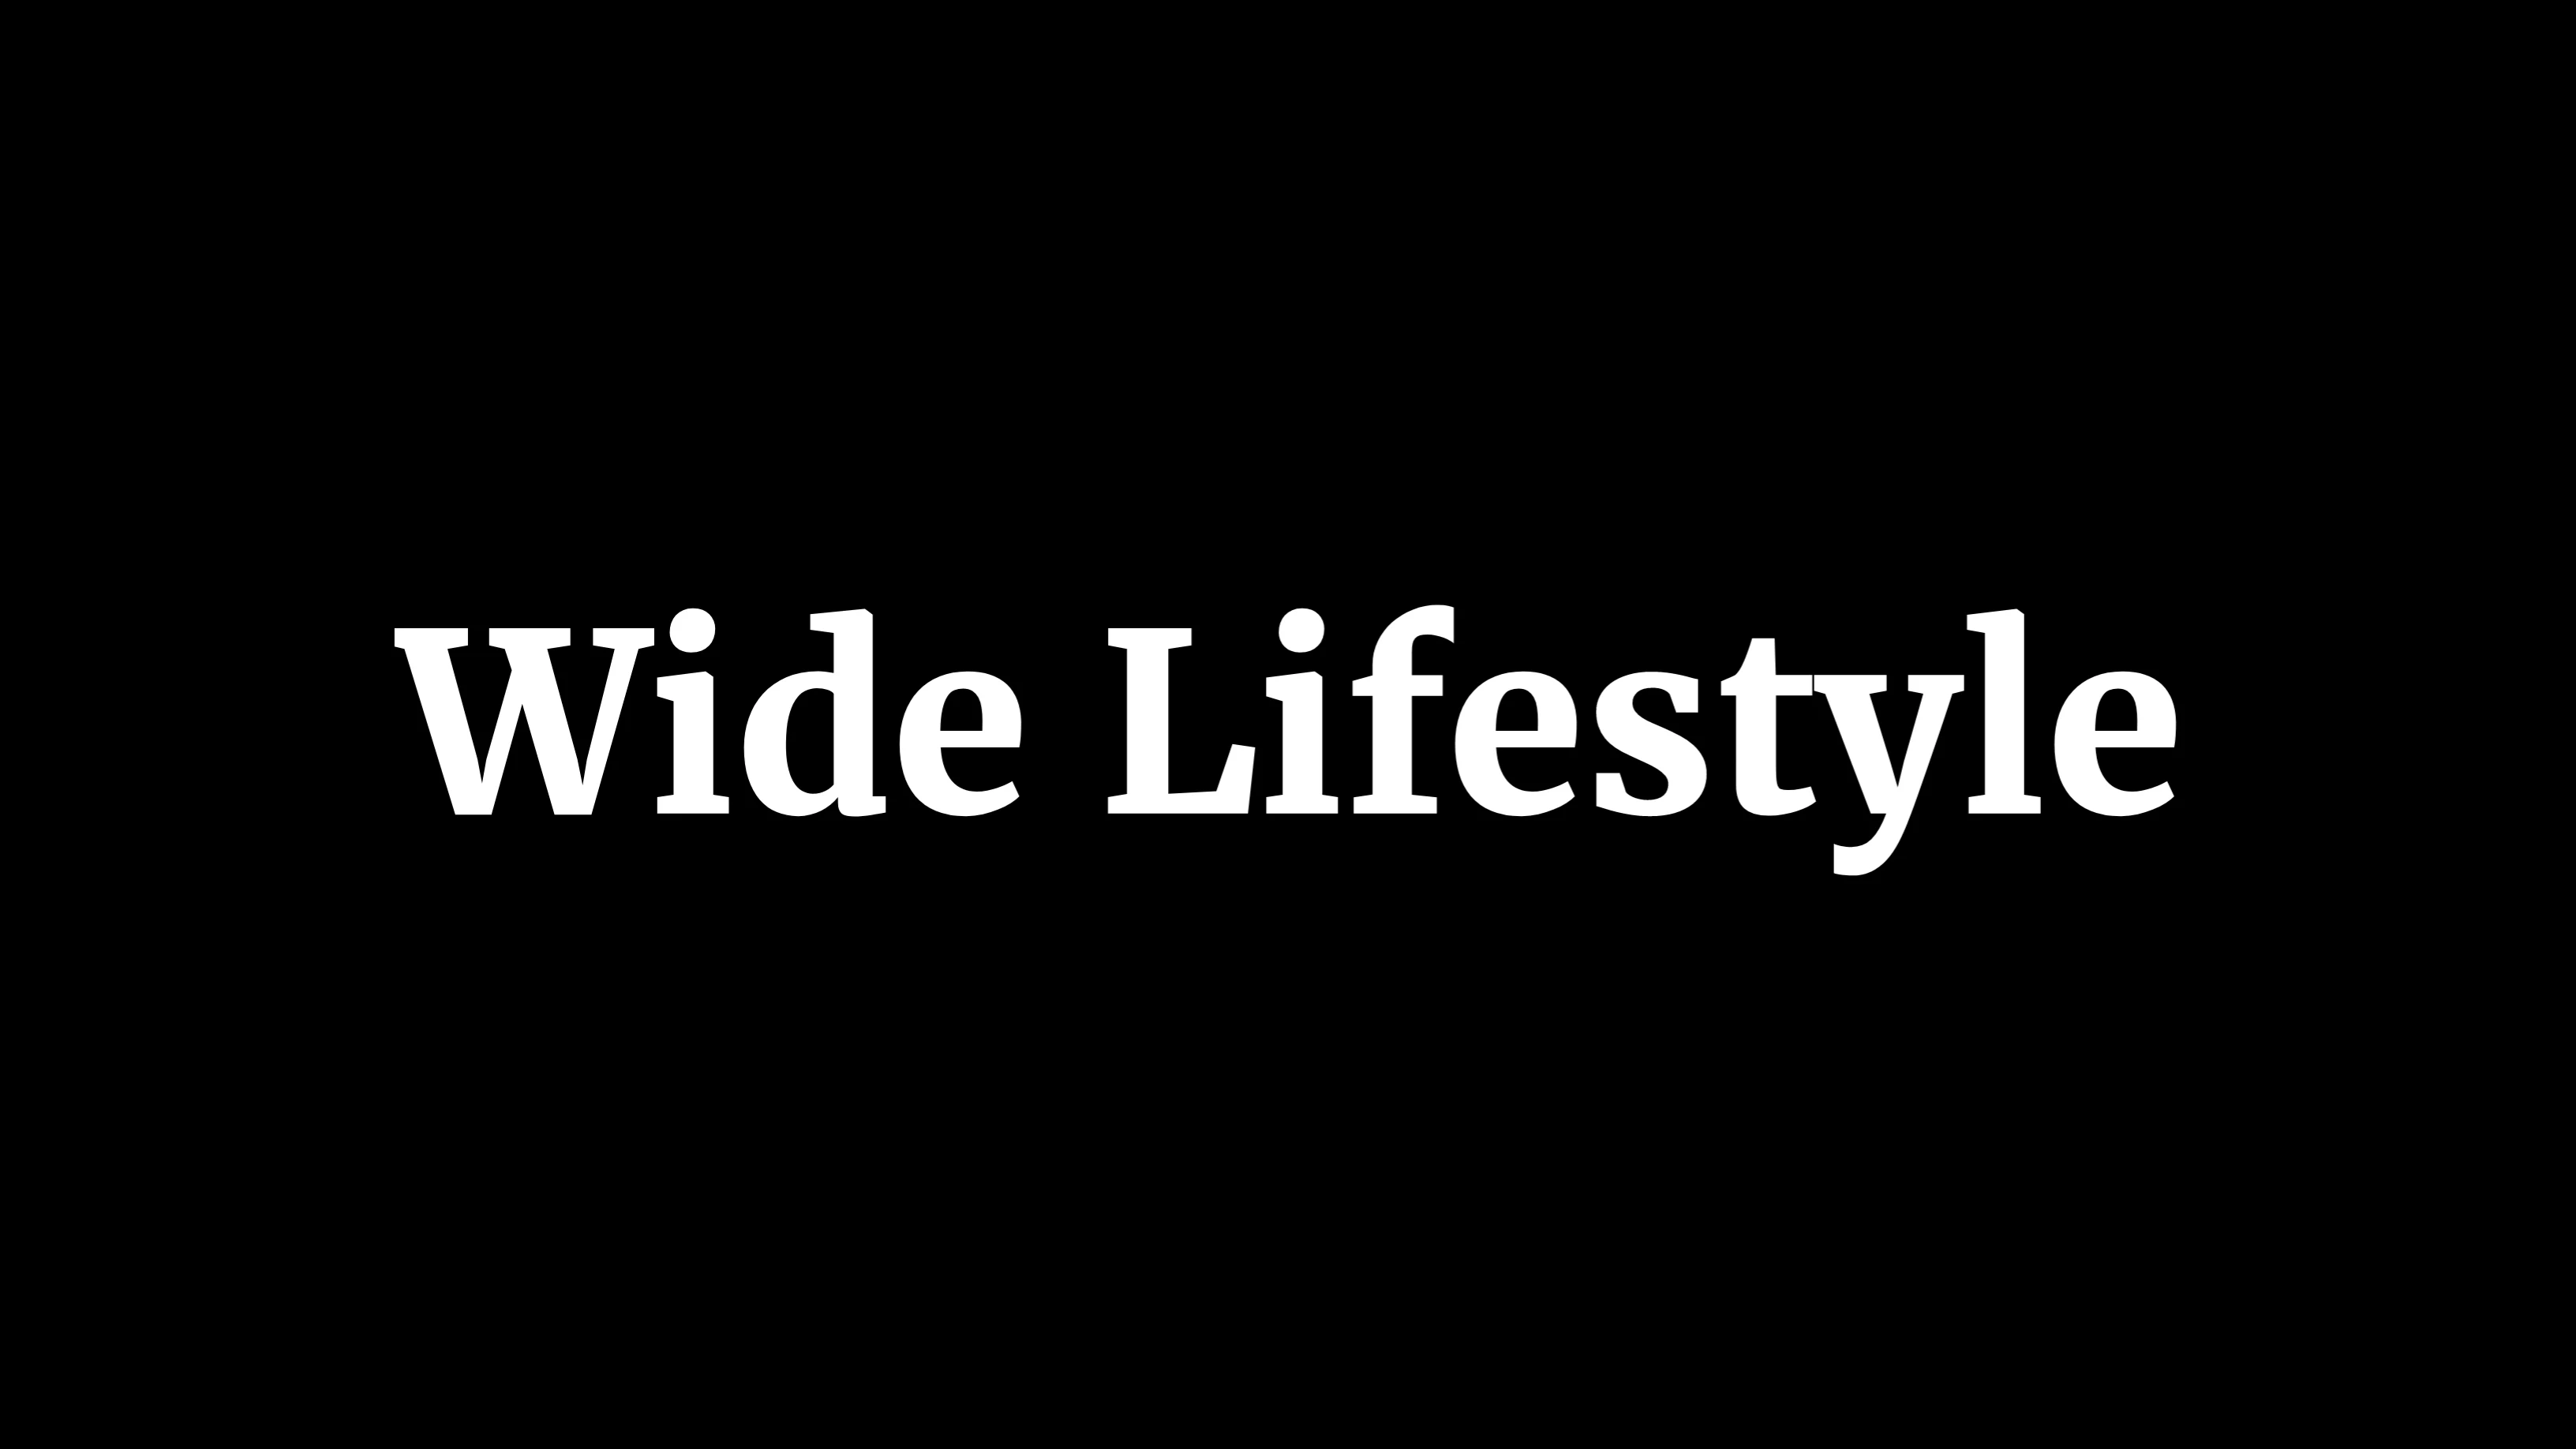 Wide Lifestyle is a website that celebrates the diversity of human experiences and lifestyles throughout the world.